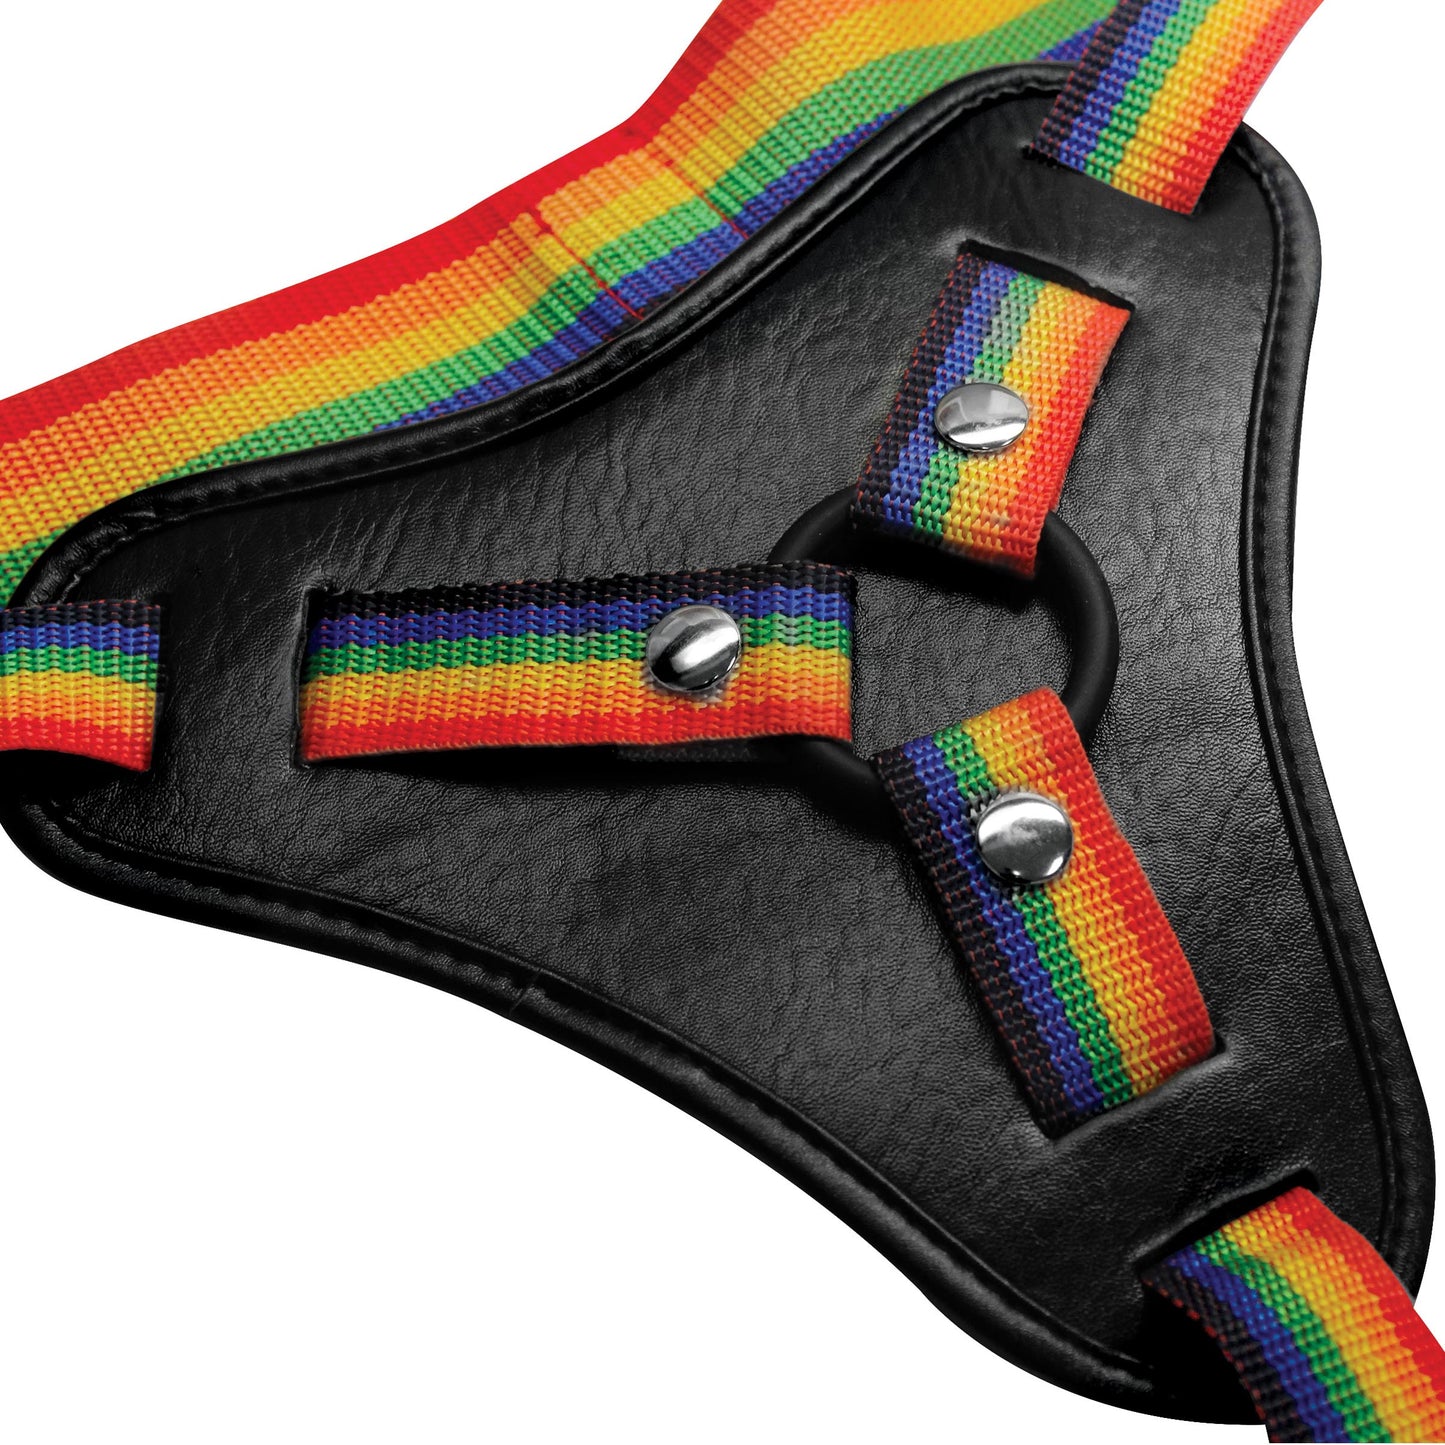 Rainbow Strap On Harness With Silicone O-rings